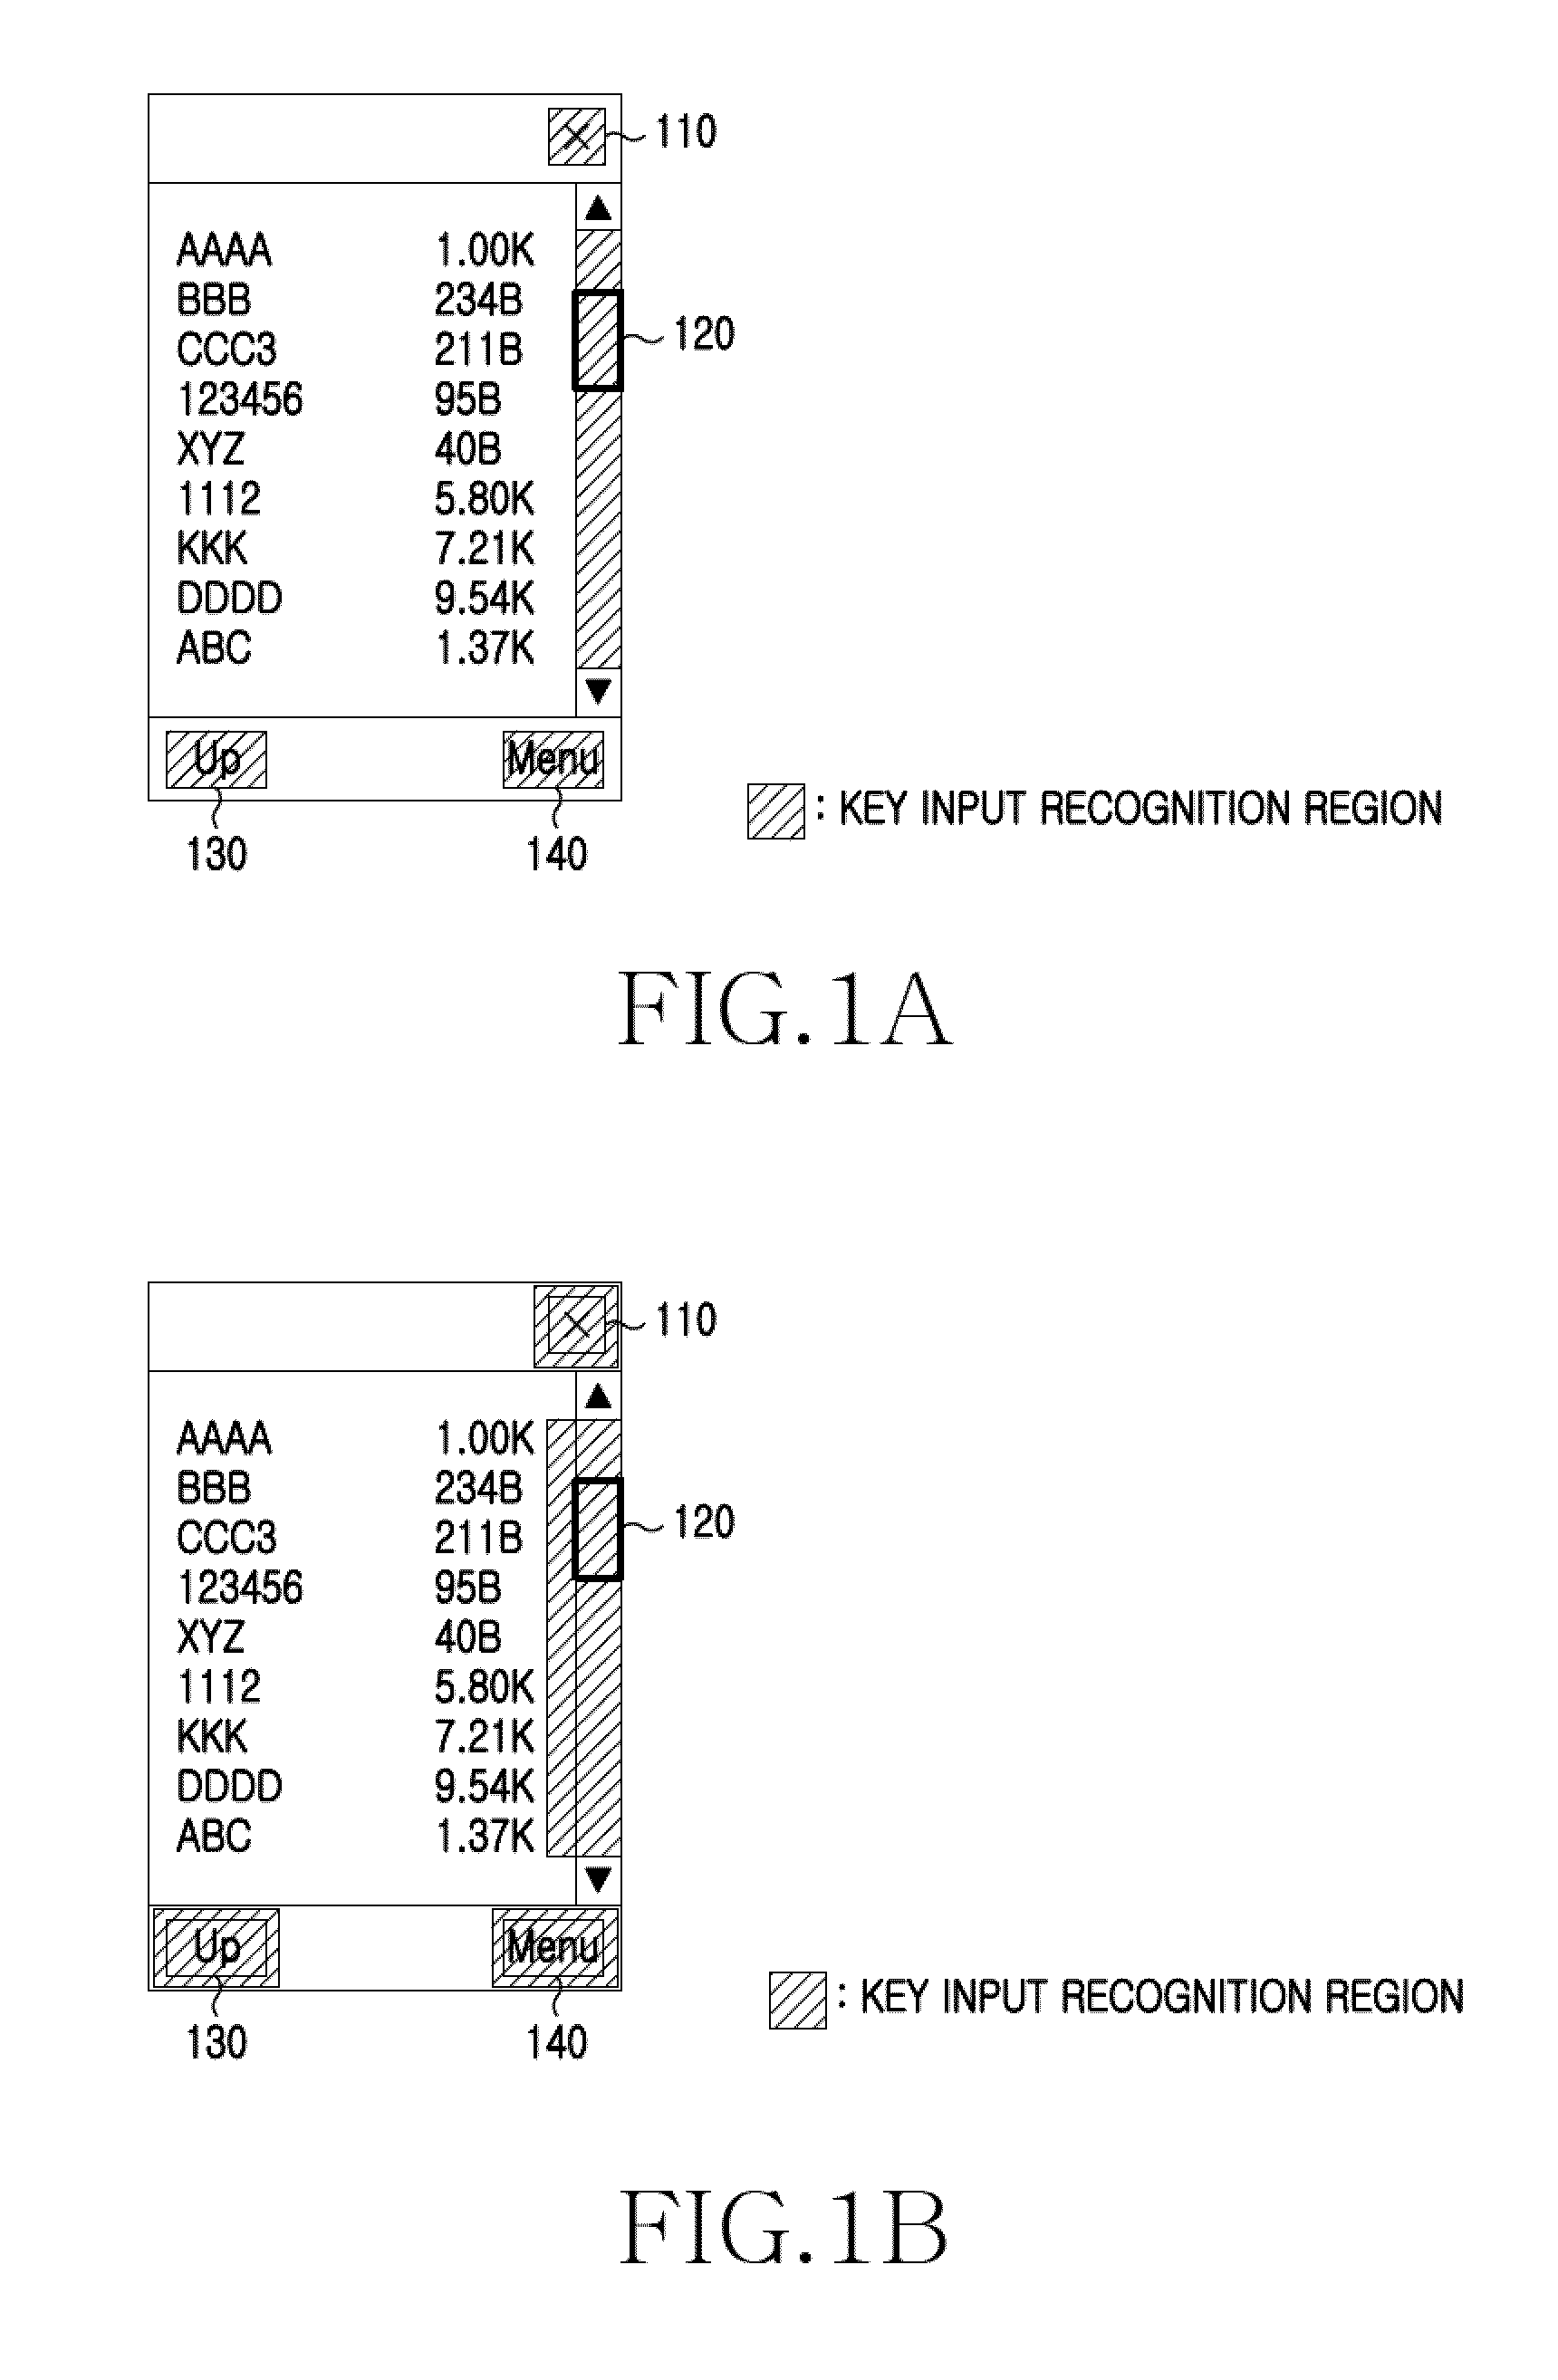 Apparatus and method for determining input in computing equipment with touch screen